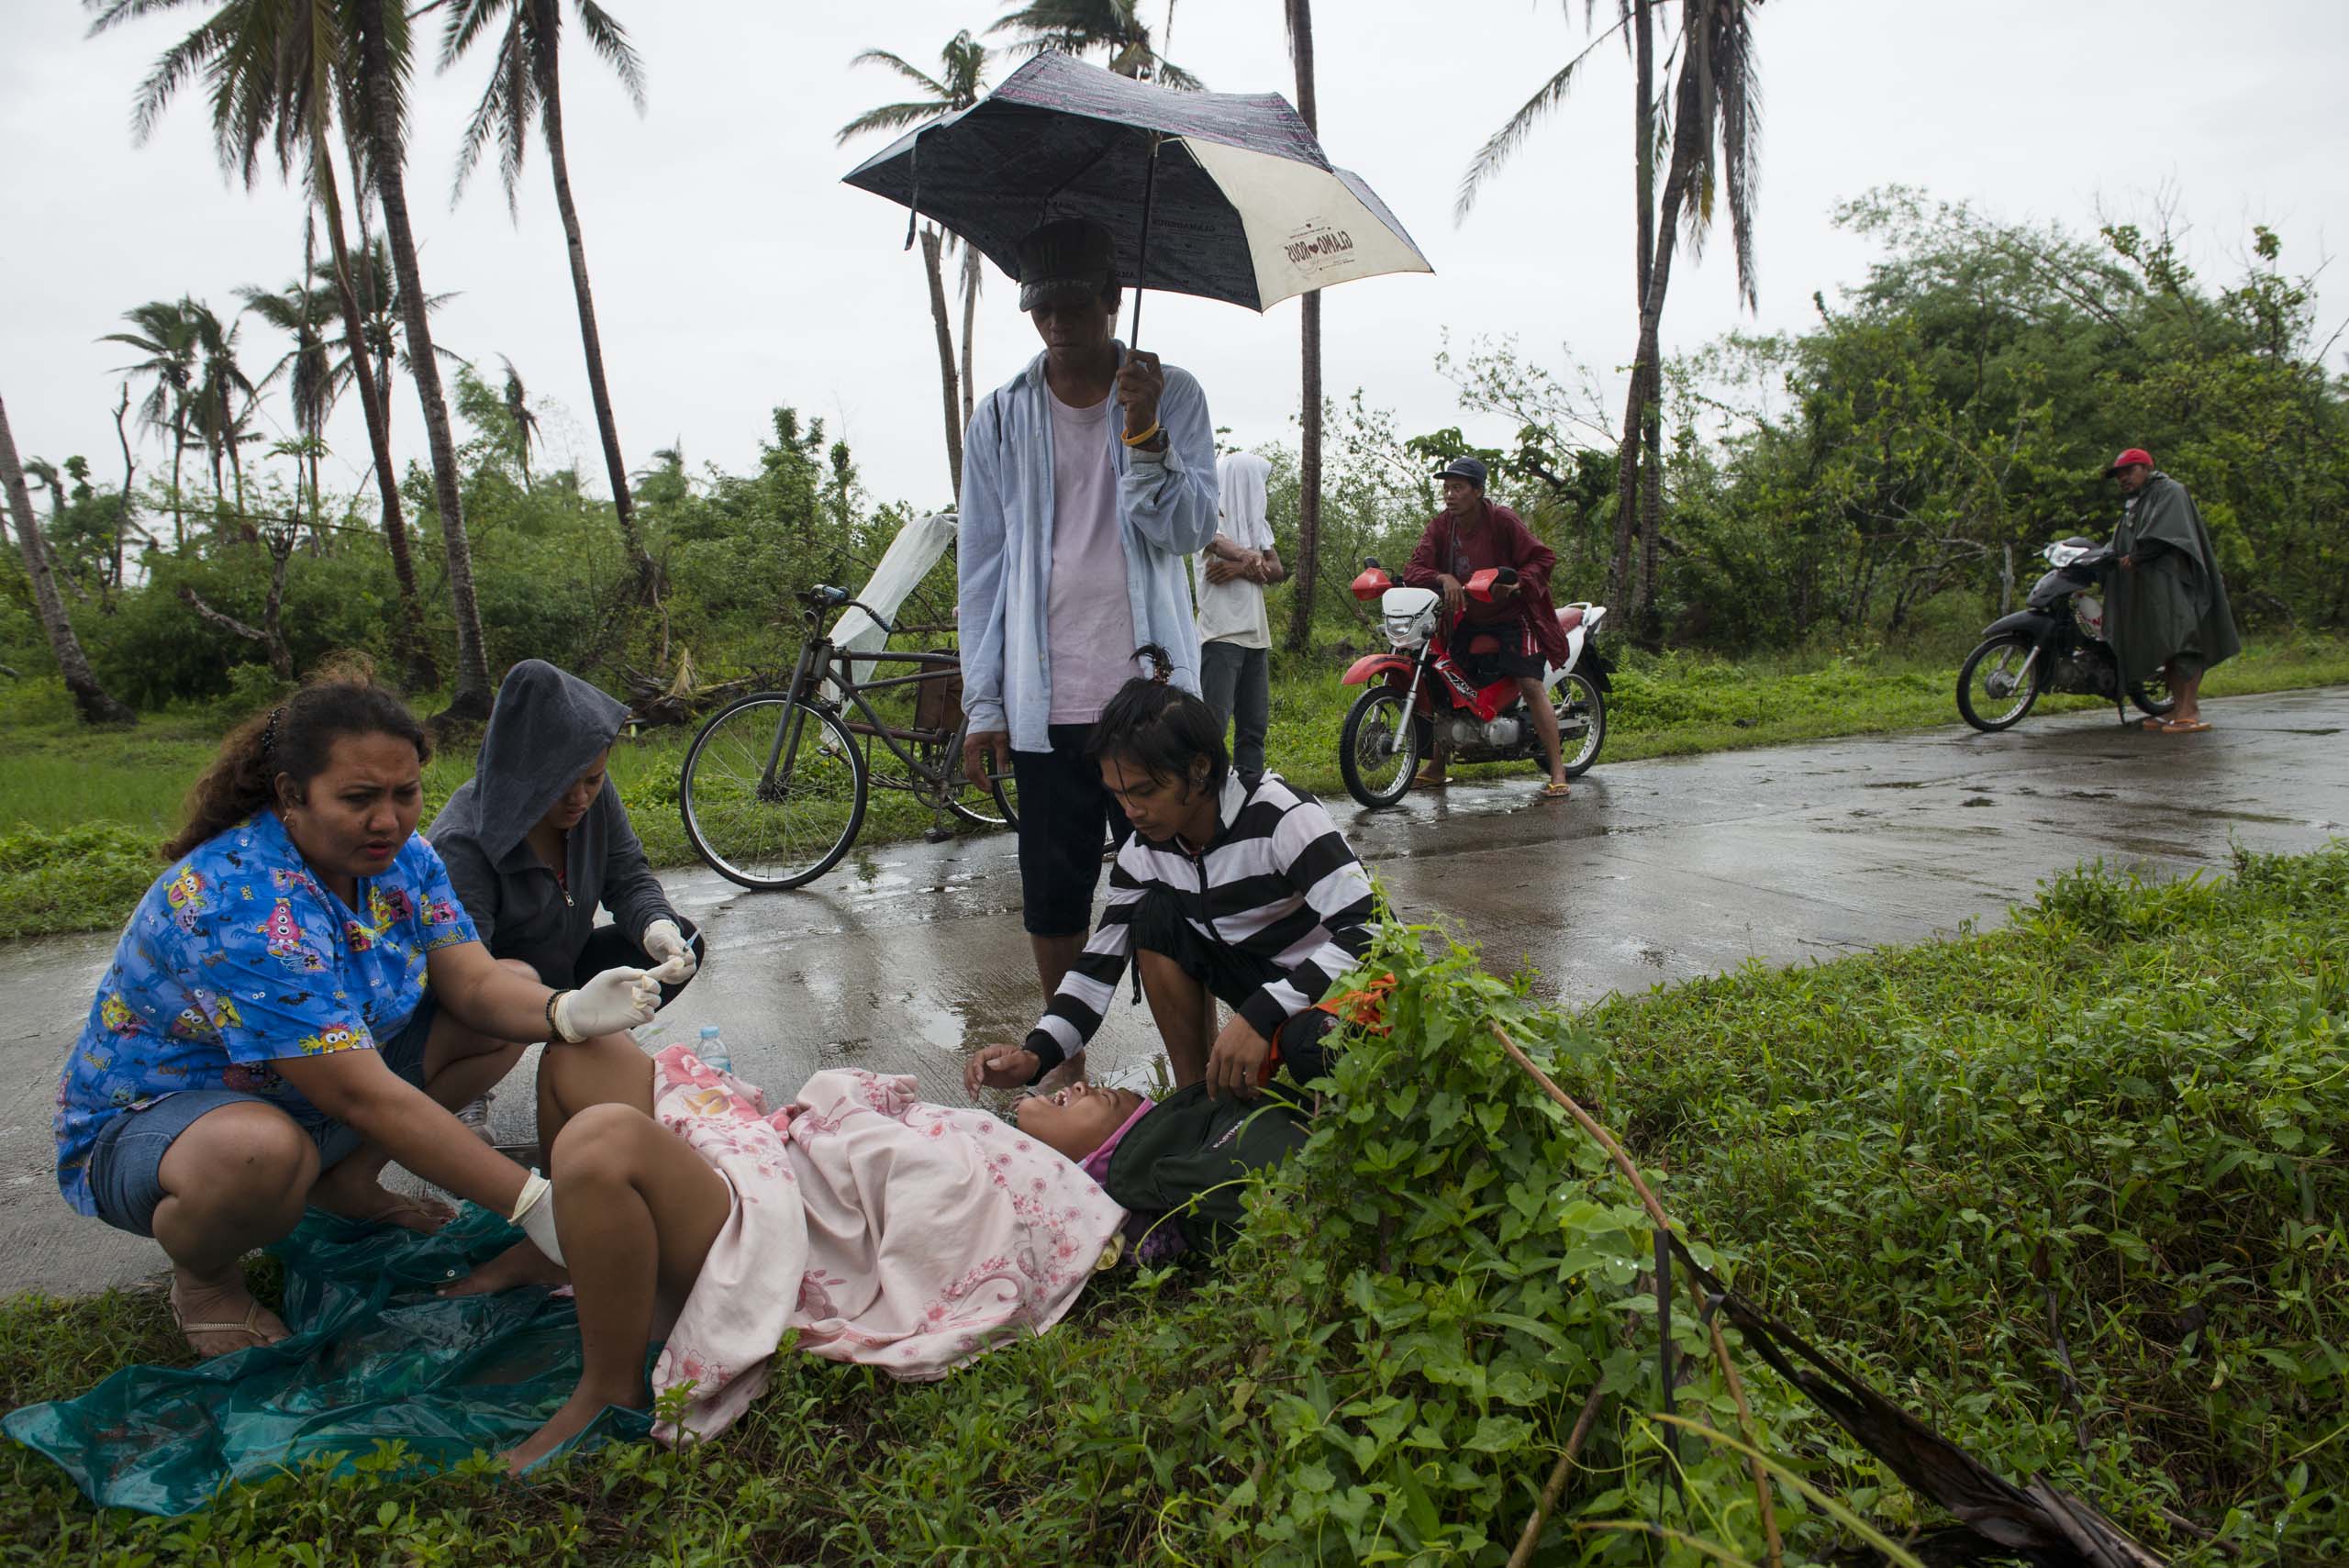 Jan. 11, 2014: Midwife Norina Malate delivers the baby of Analyn Pesado, 18, as Analyn's partner, Ryan Bacate, 21, looks on at the side of the road en route to the nearest clinic in Tolosa, outside of Tacloban, in the Philippines.